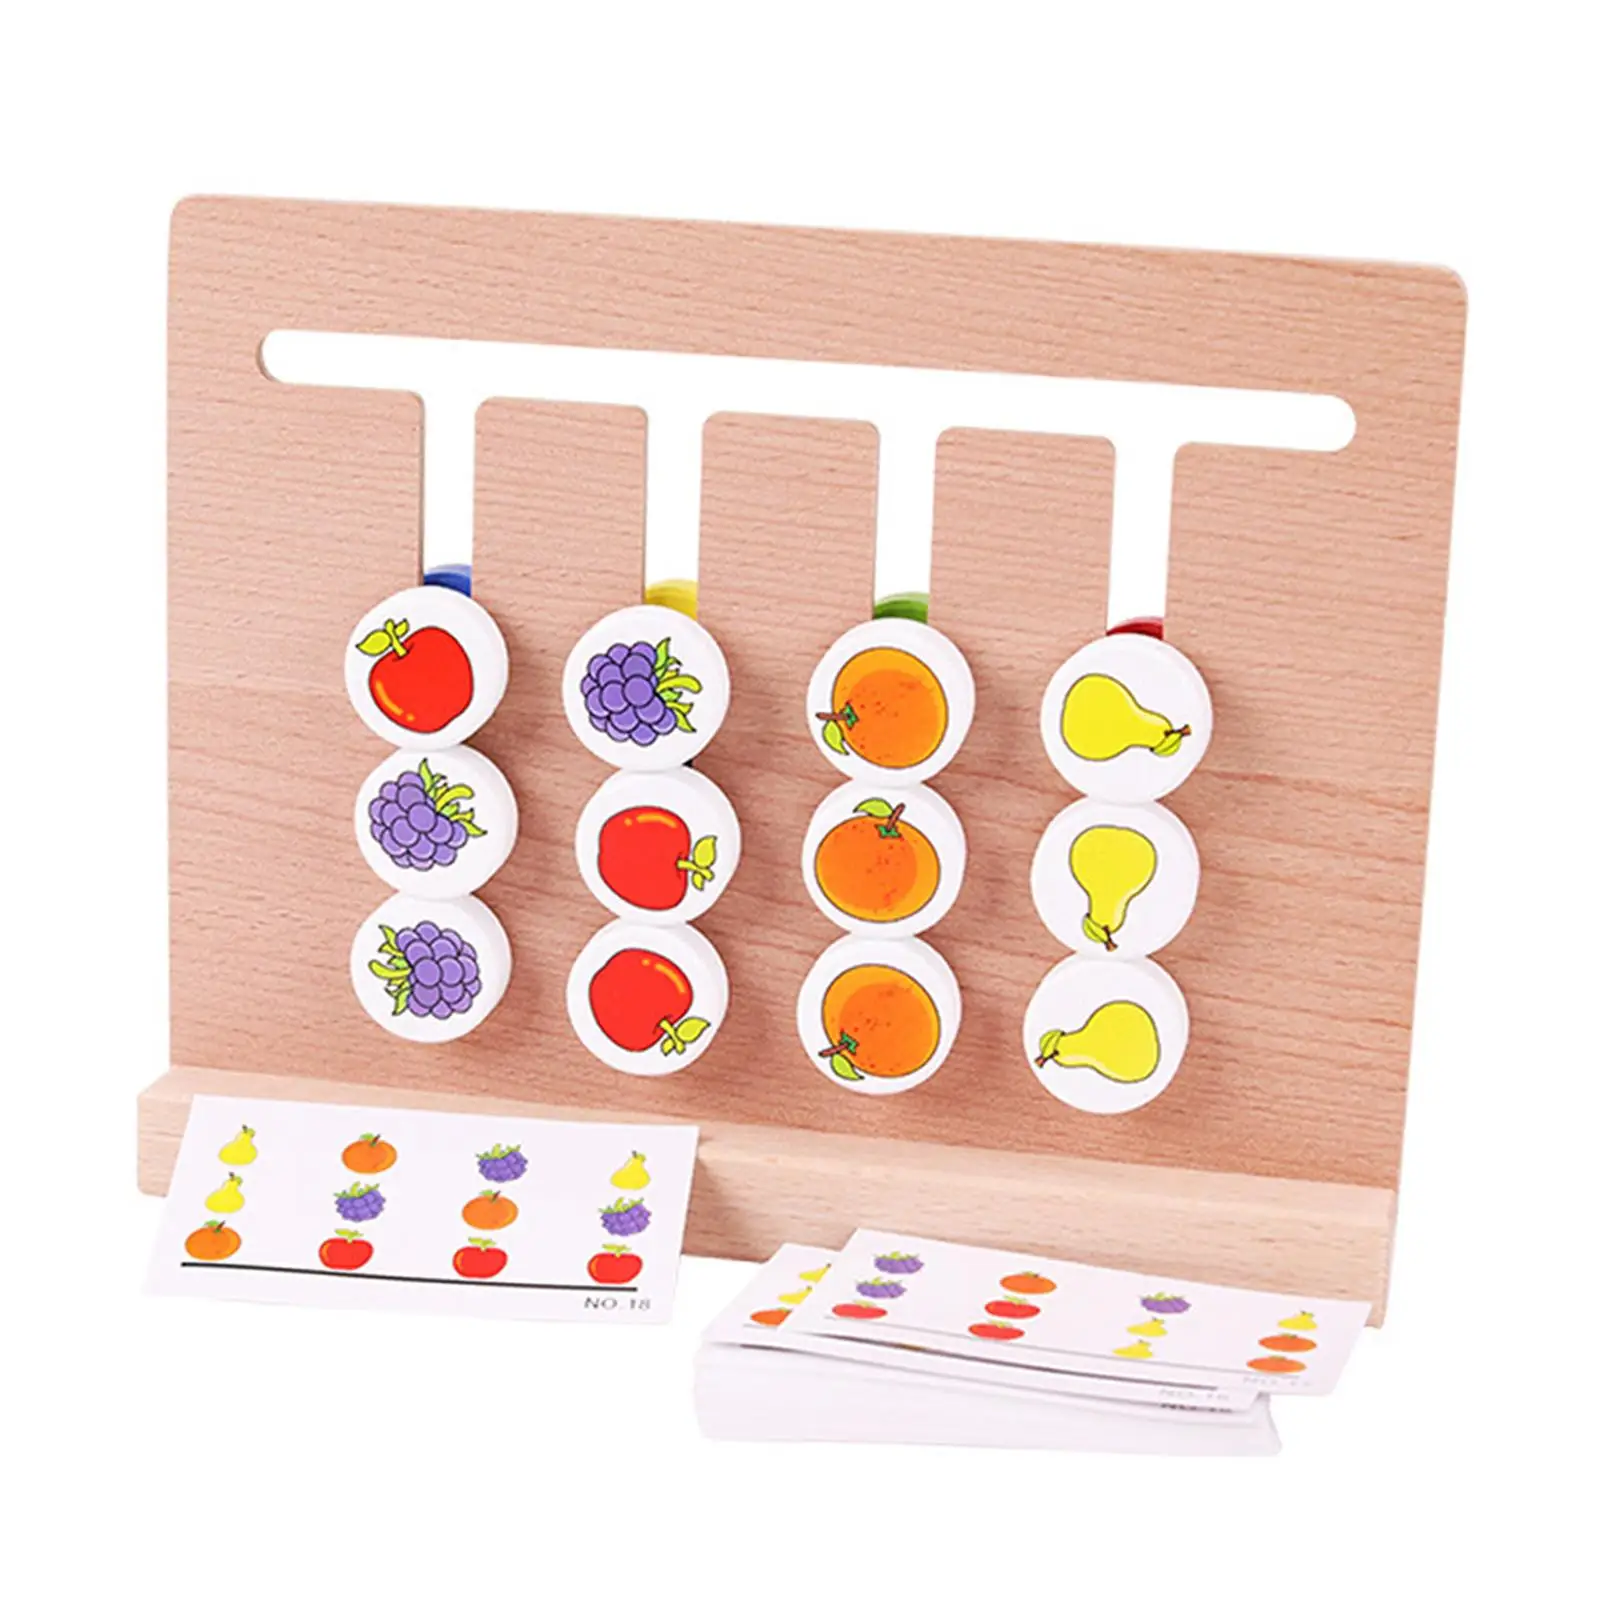 Early Childhood Education Matching Game Developmental Toy for Preschool